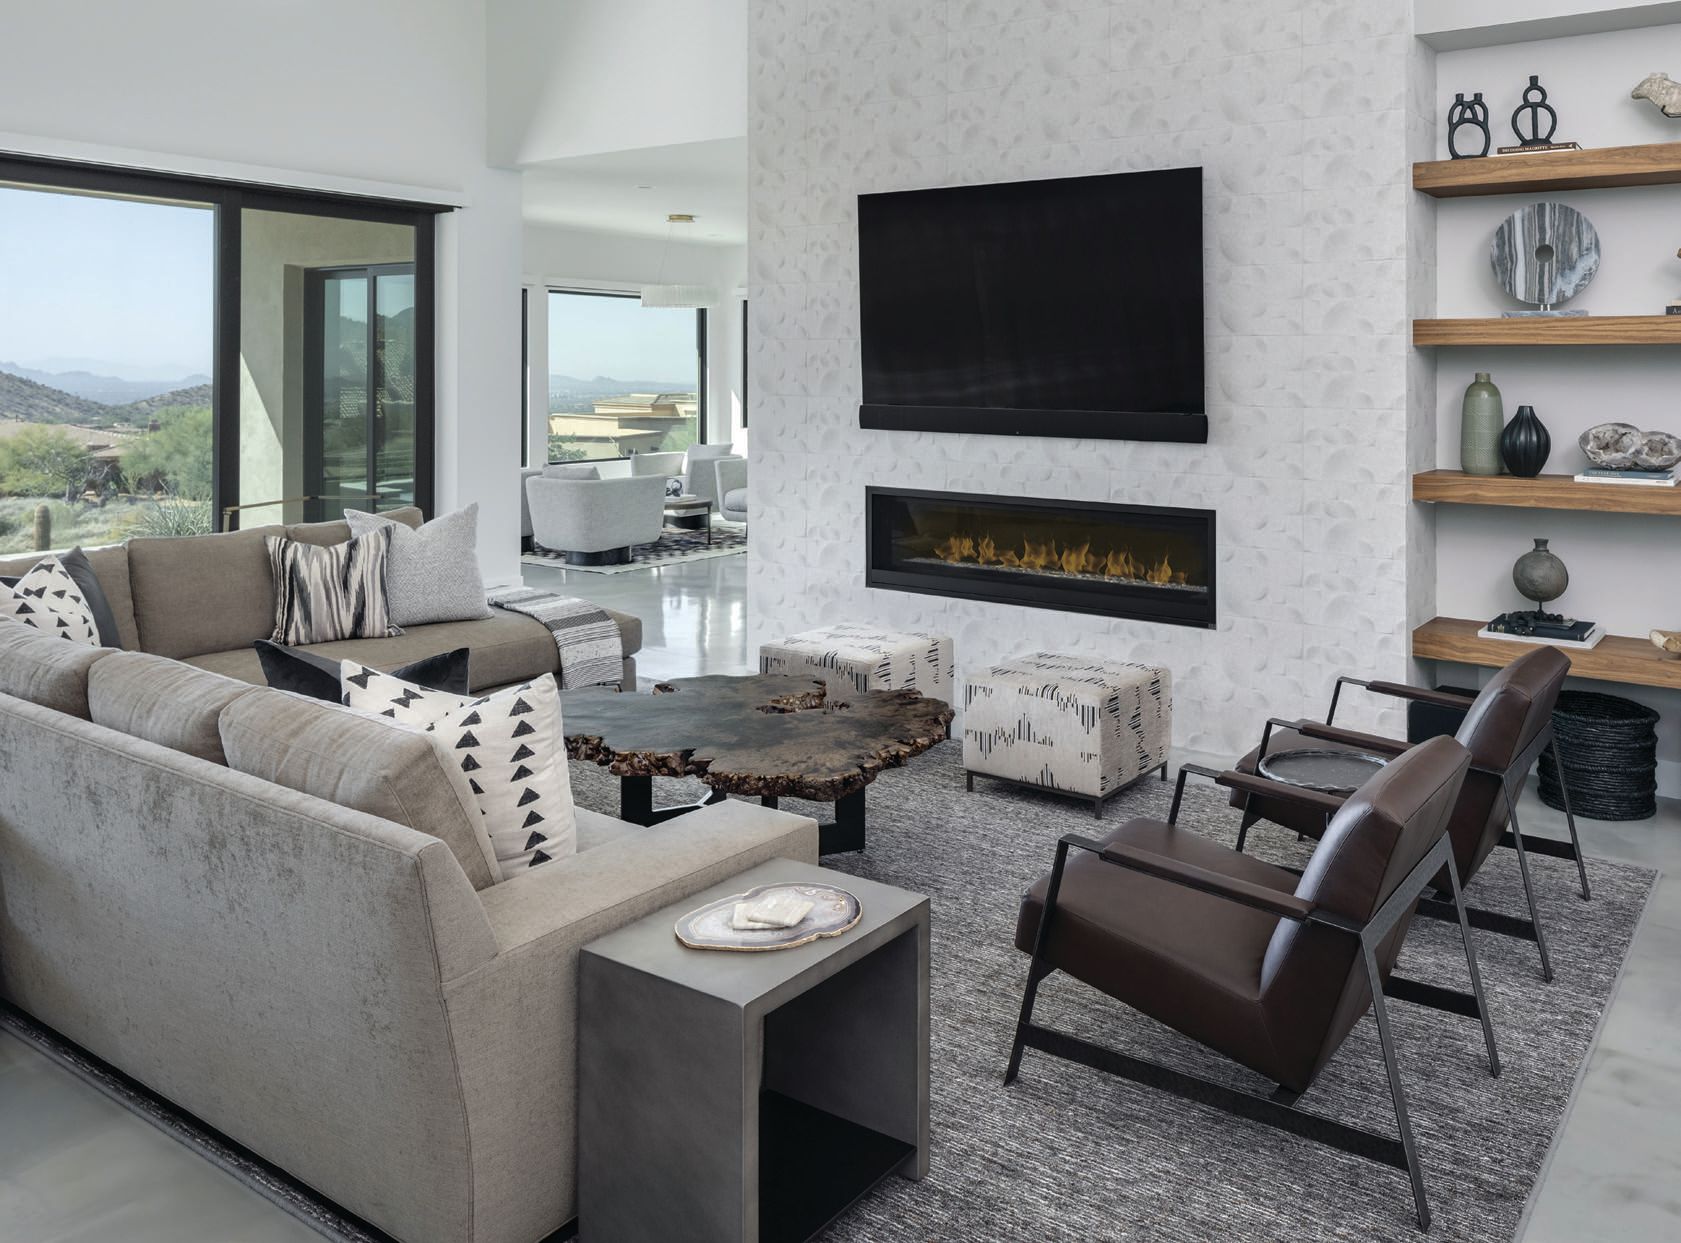 The living room is set with a plush cushioned sectional and leather accent chairs for entertaining Photographed by Drufer Photography